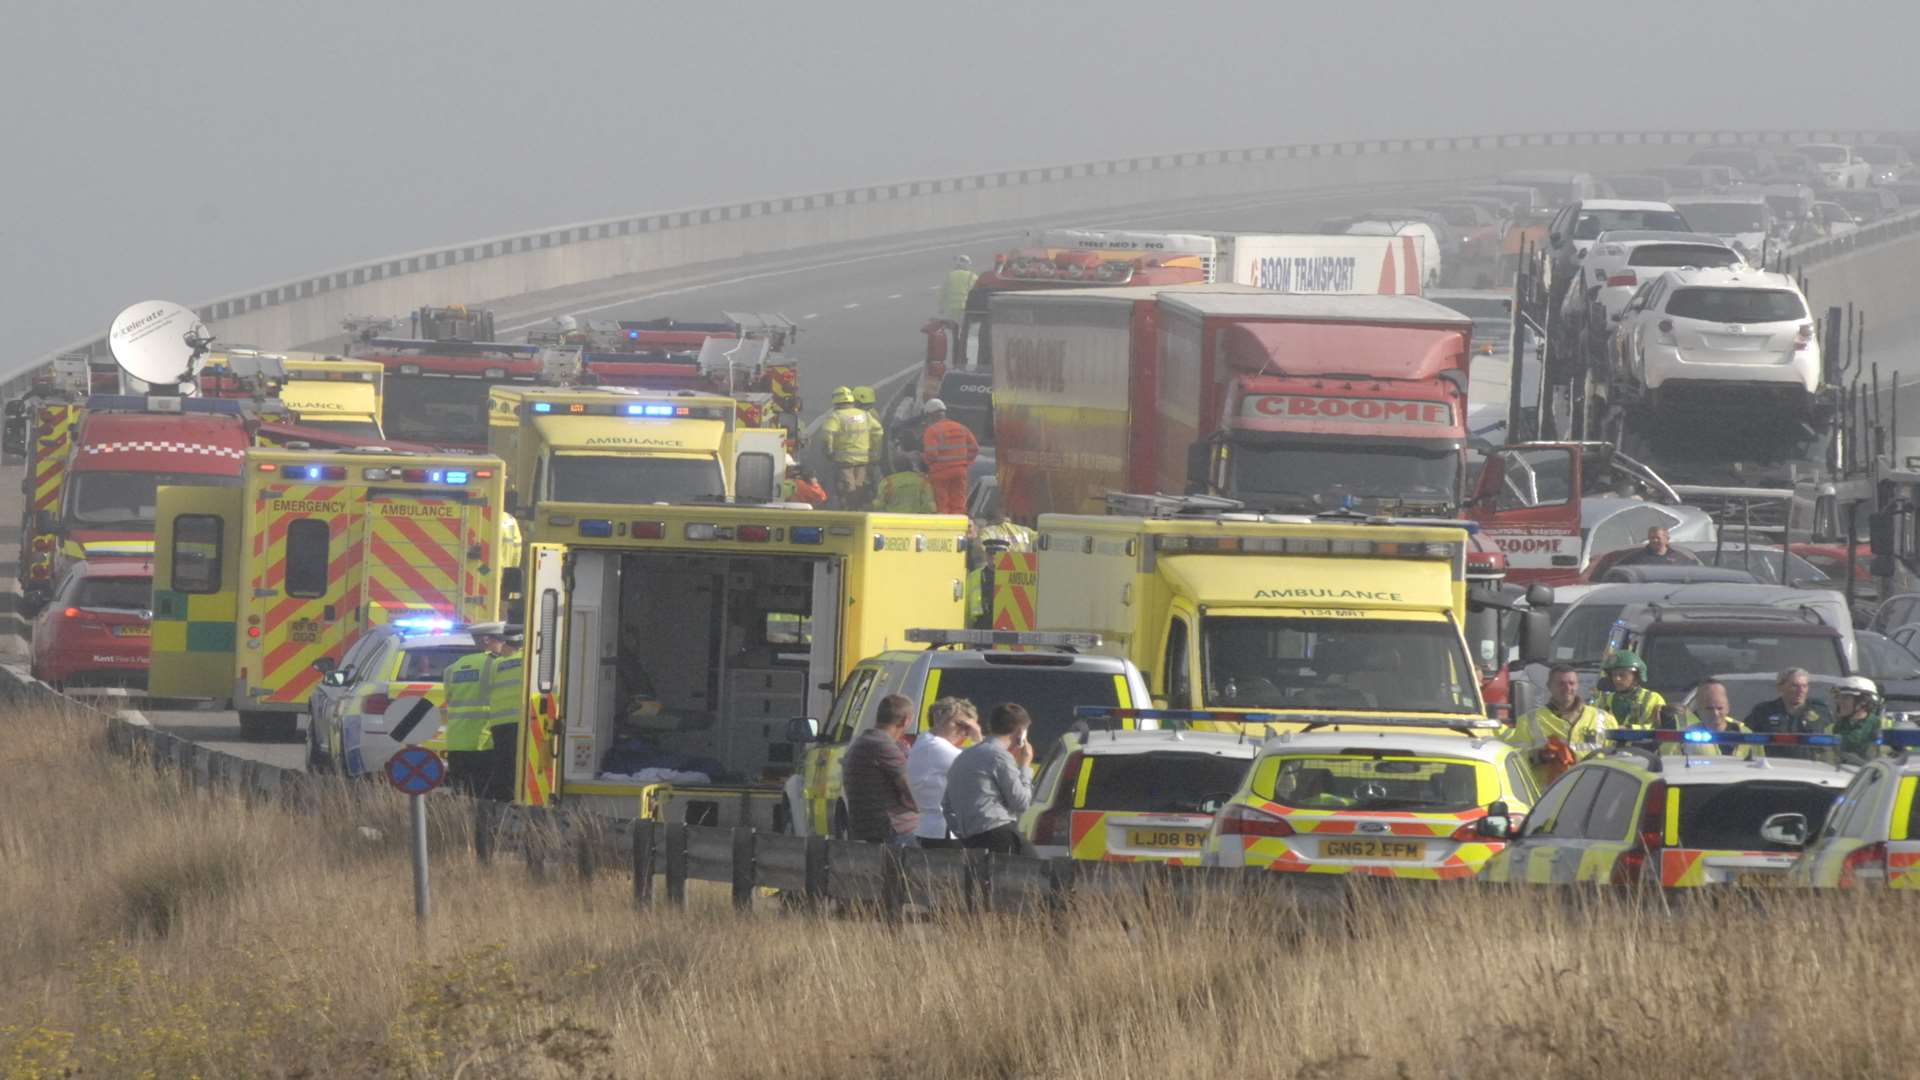 A string of ambulances treat the injured at Sheppey. Picture: Chris Davey